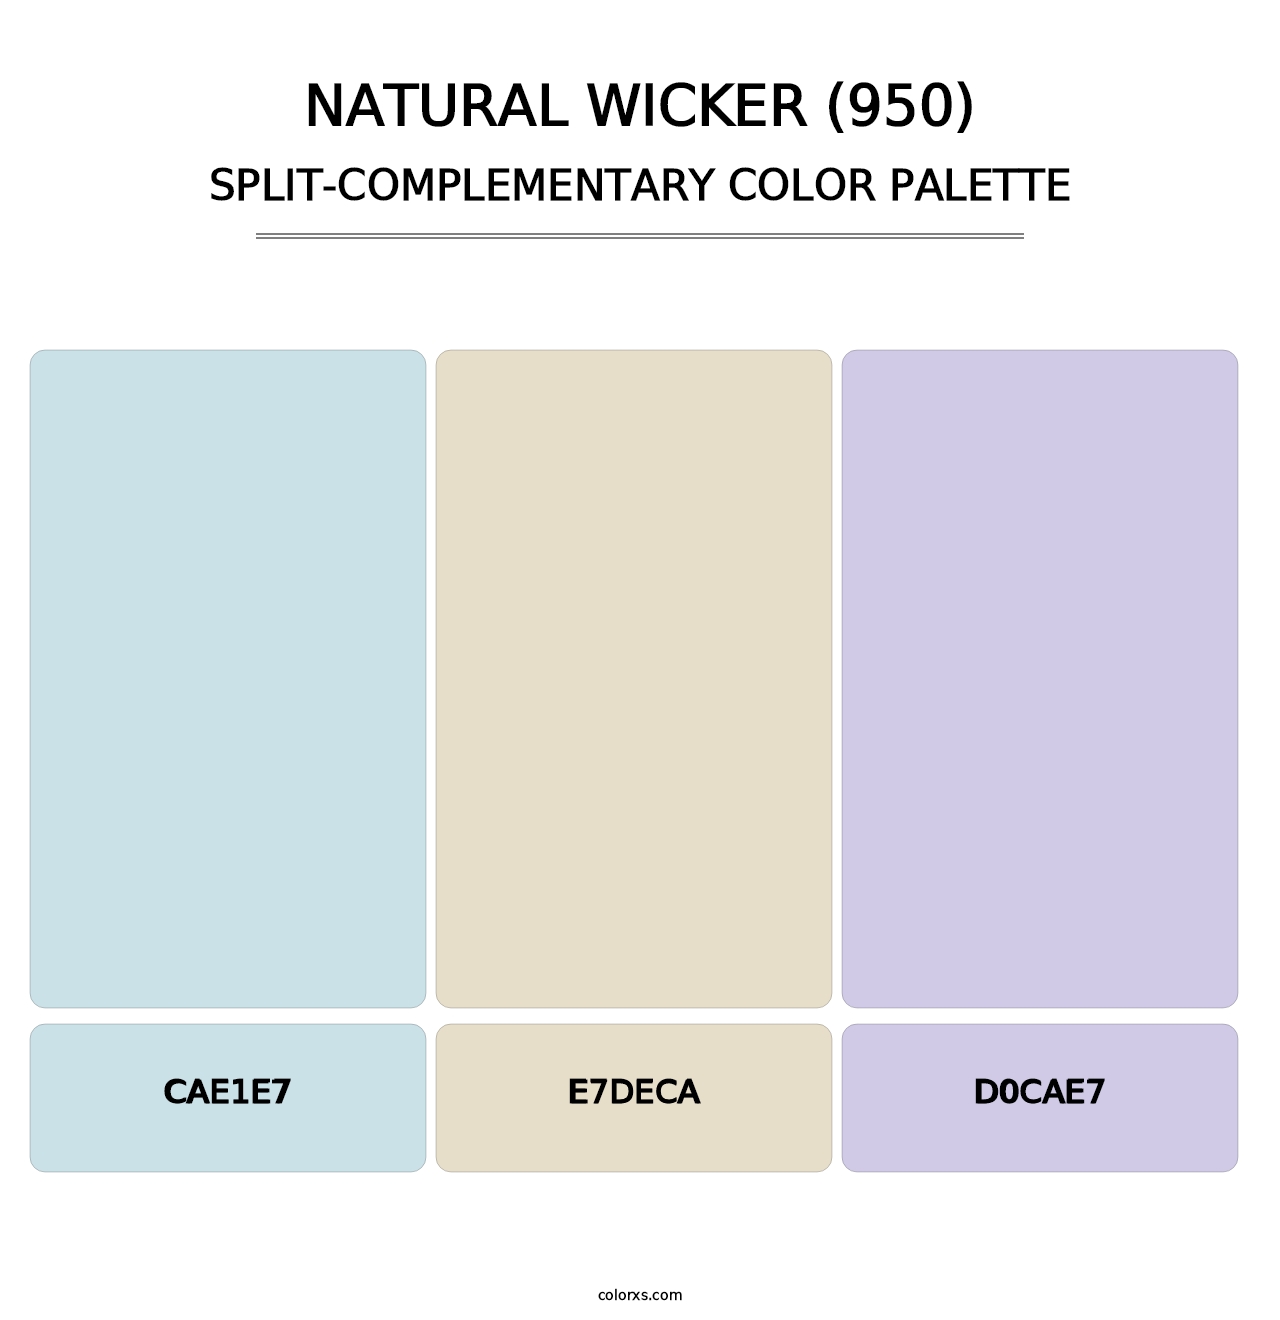 Natural Wicker (950) - Split-Complementary Color Palette